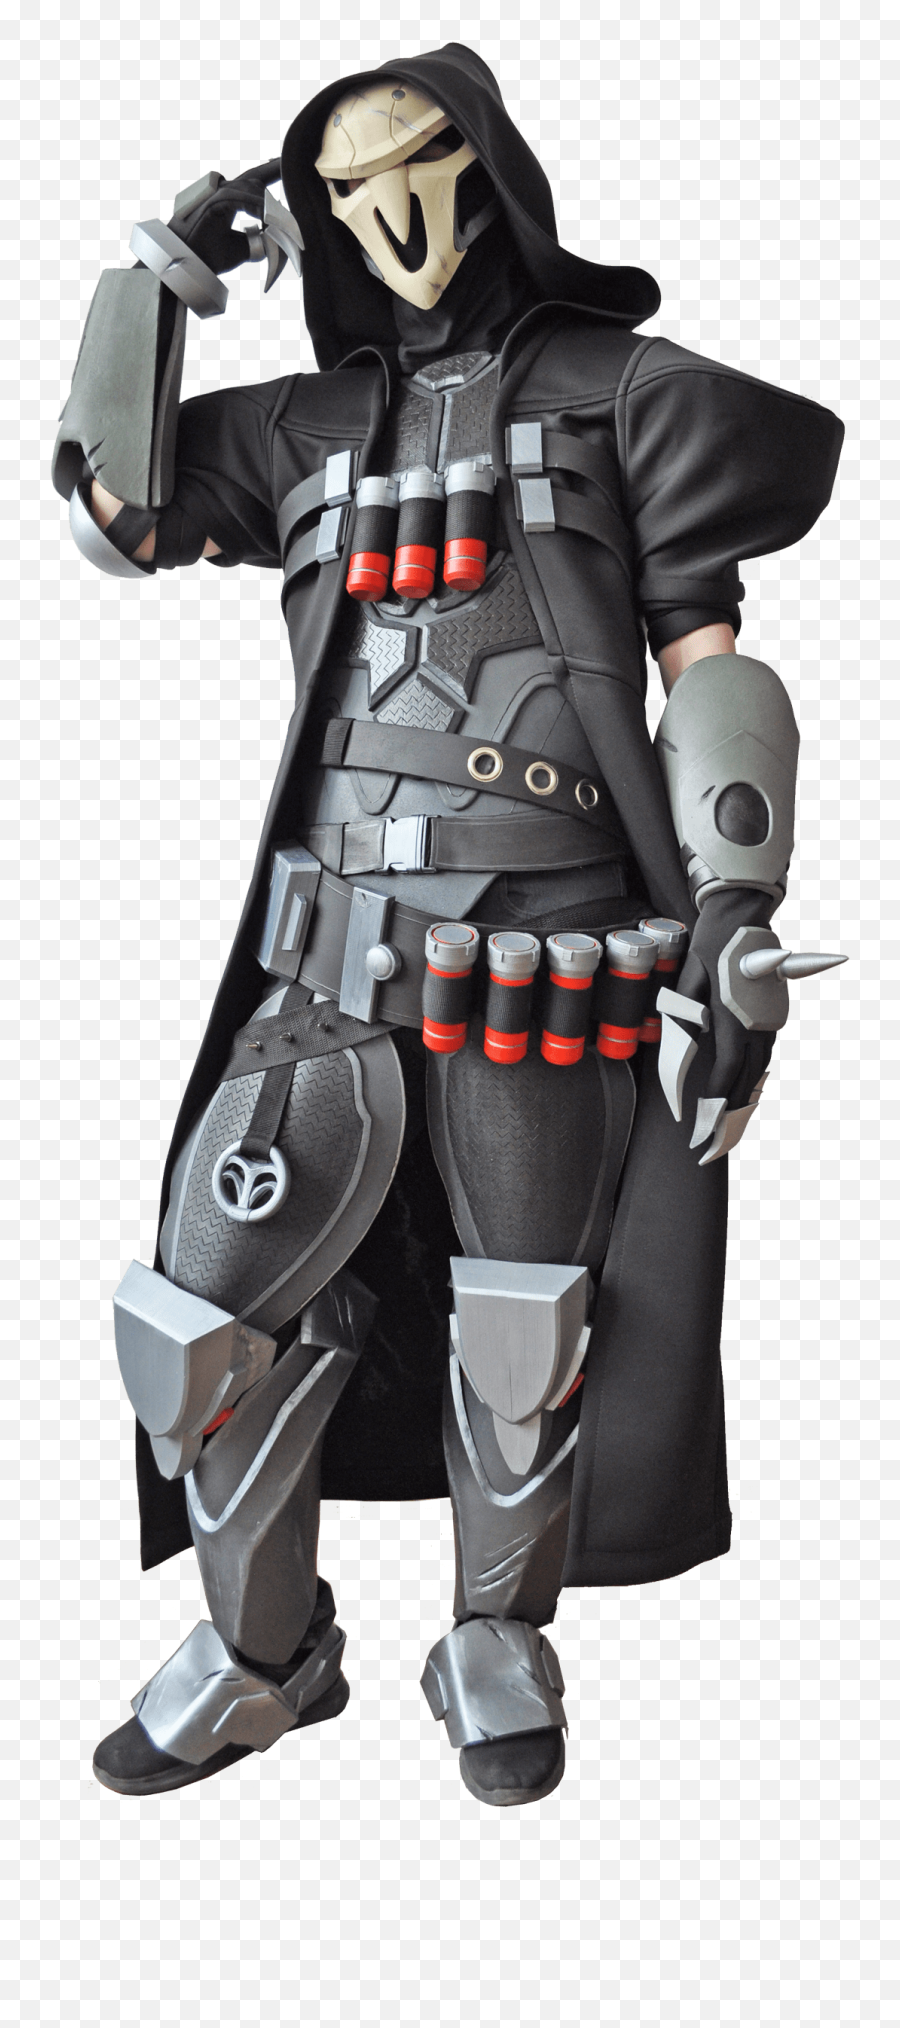 Overwatch Reaper Costume - Overwatch Cosplay For Sale Png,Reaper Overwatch Png